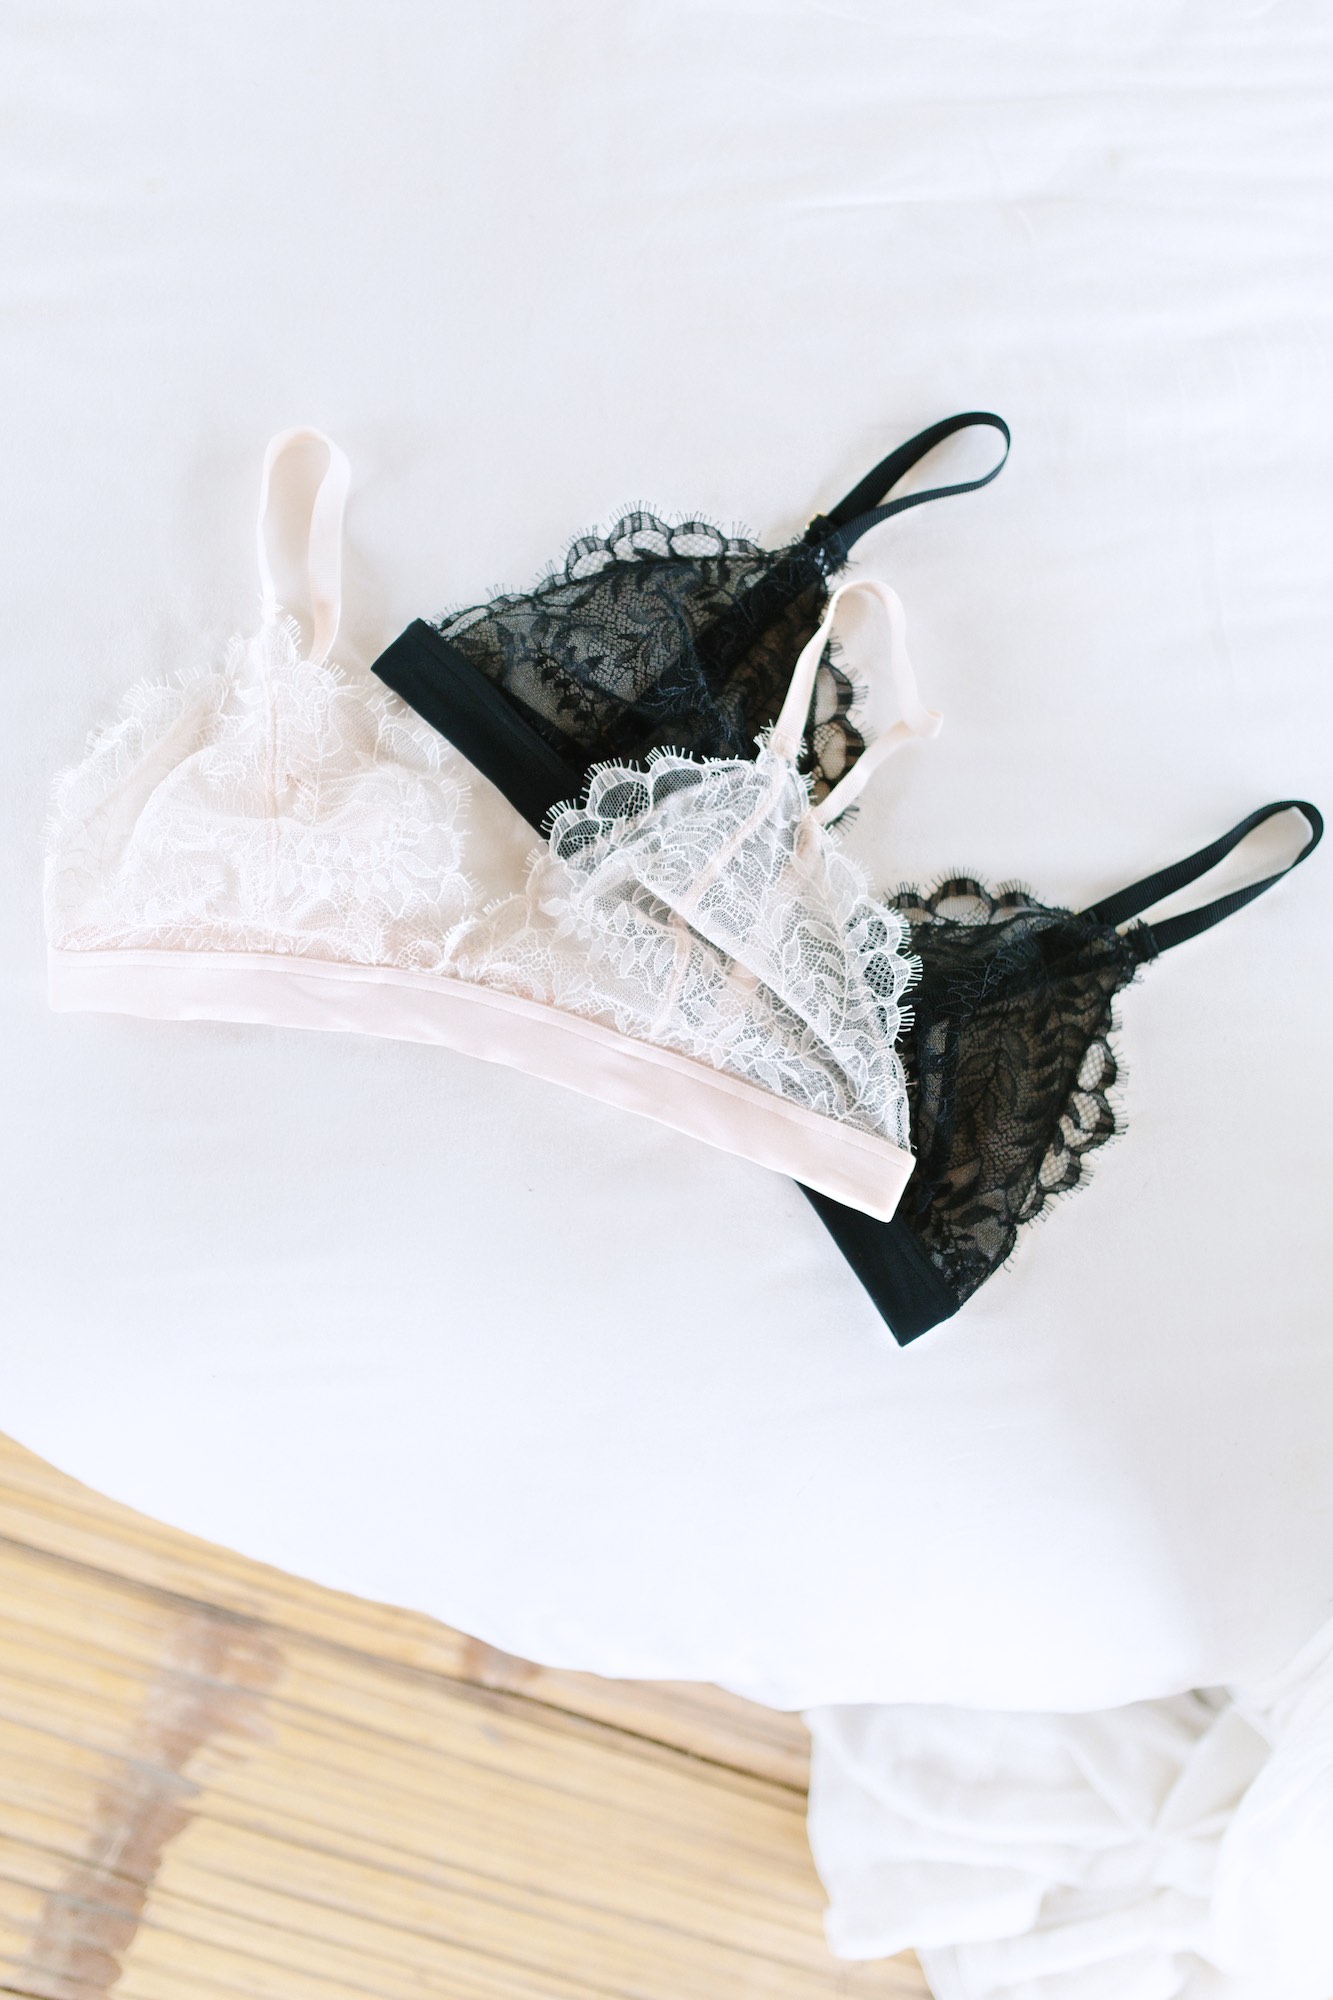 What's your go to bra style?